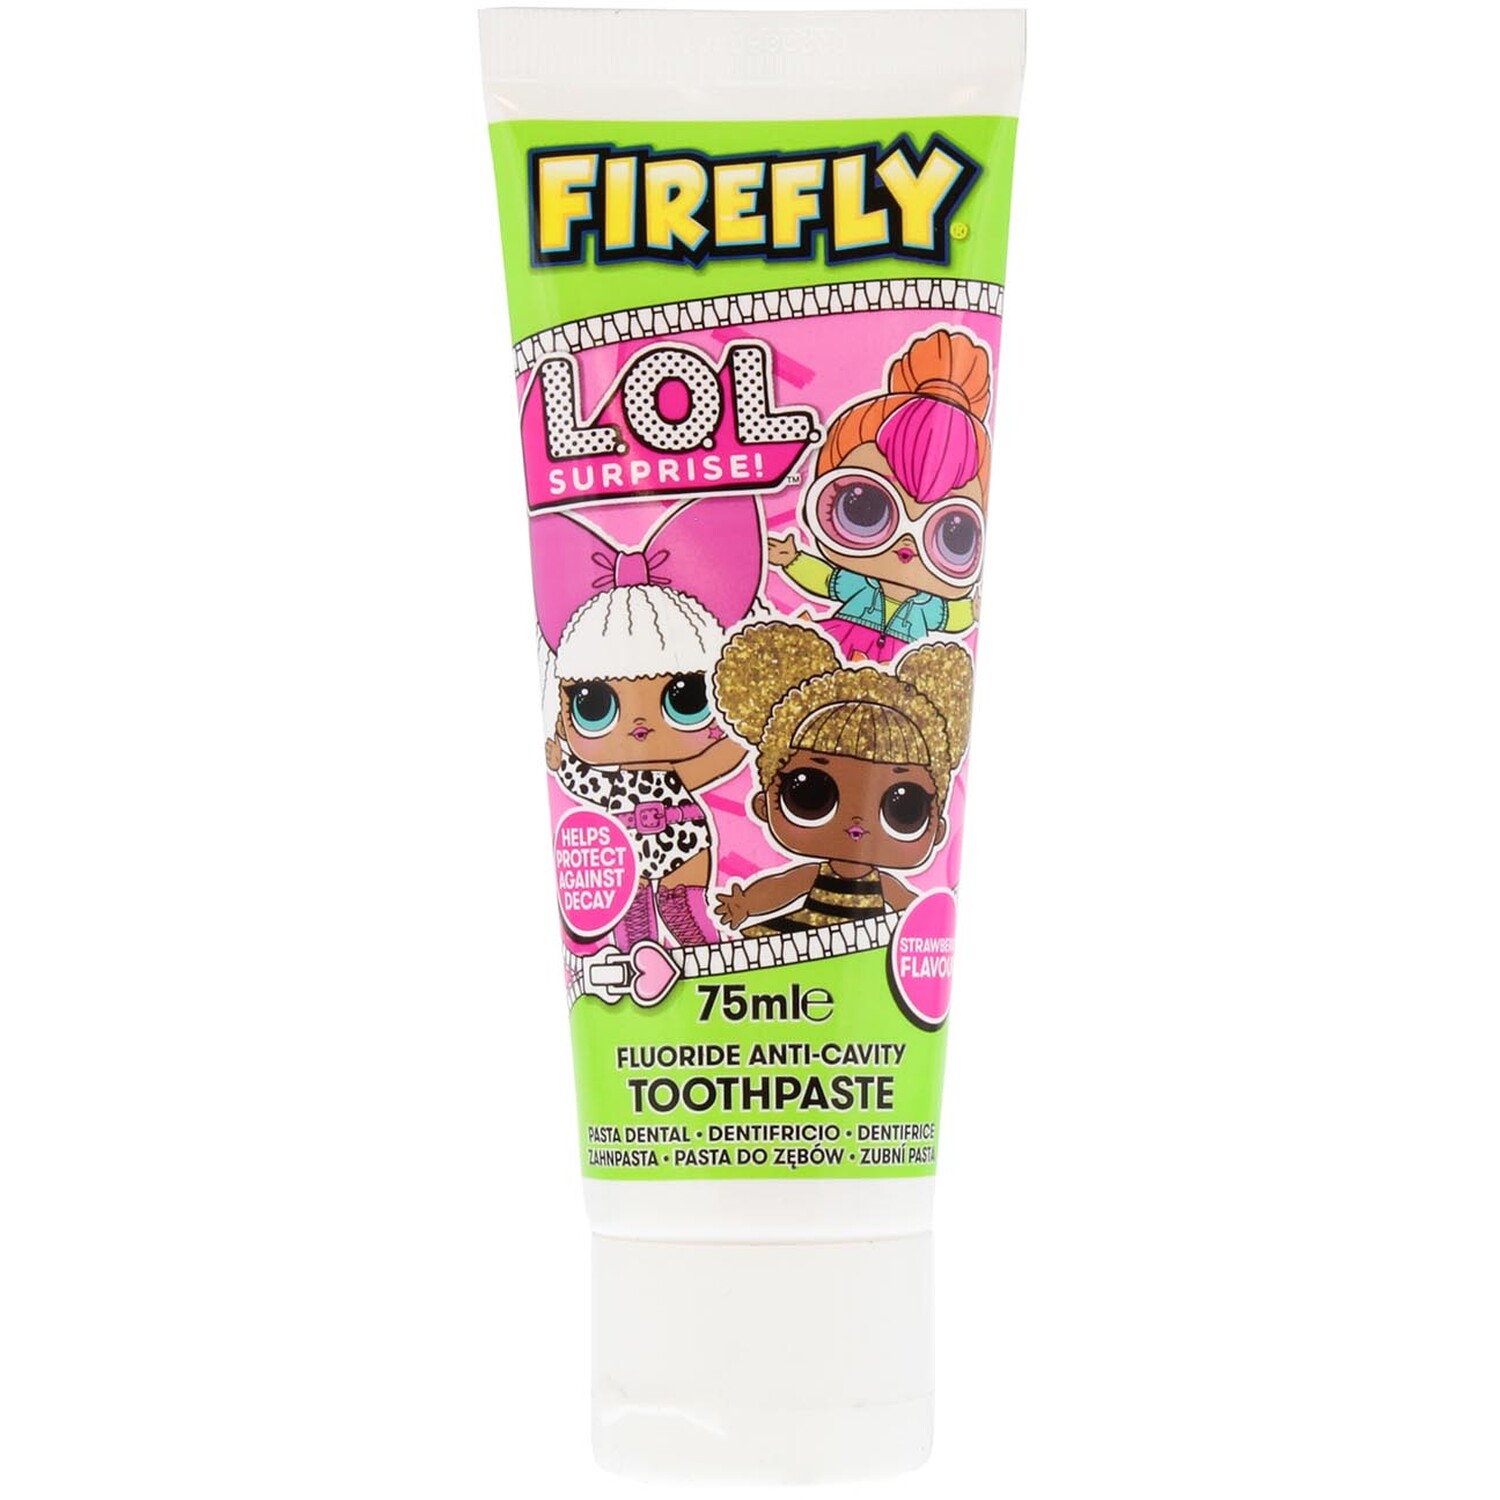 L.O.L Surprise! Toothpaste 75ml - Pink Image